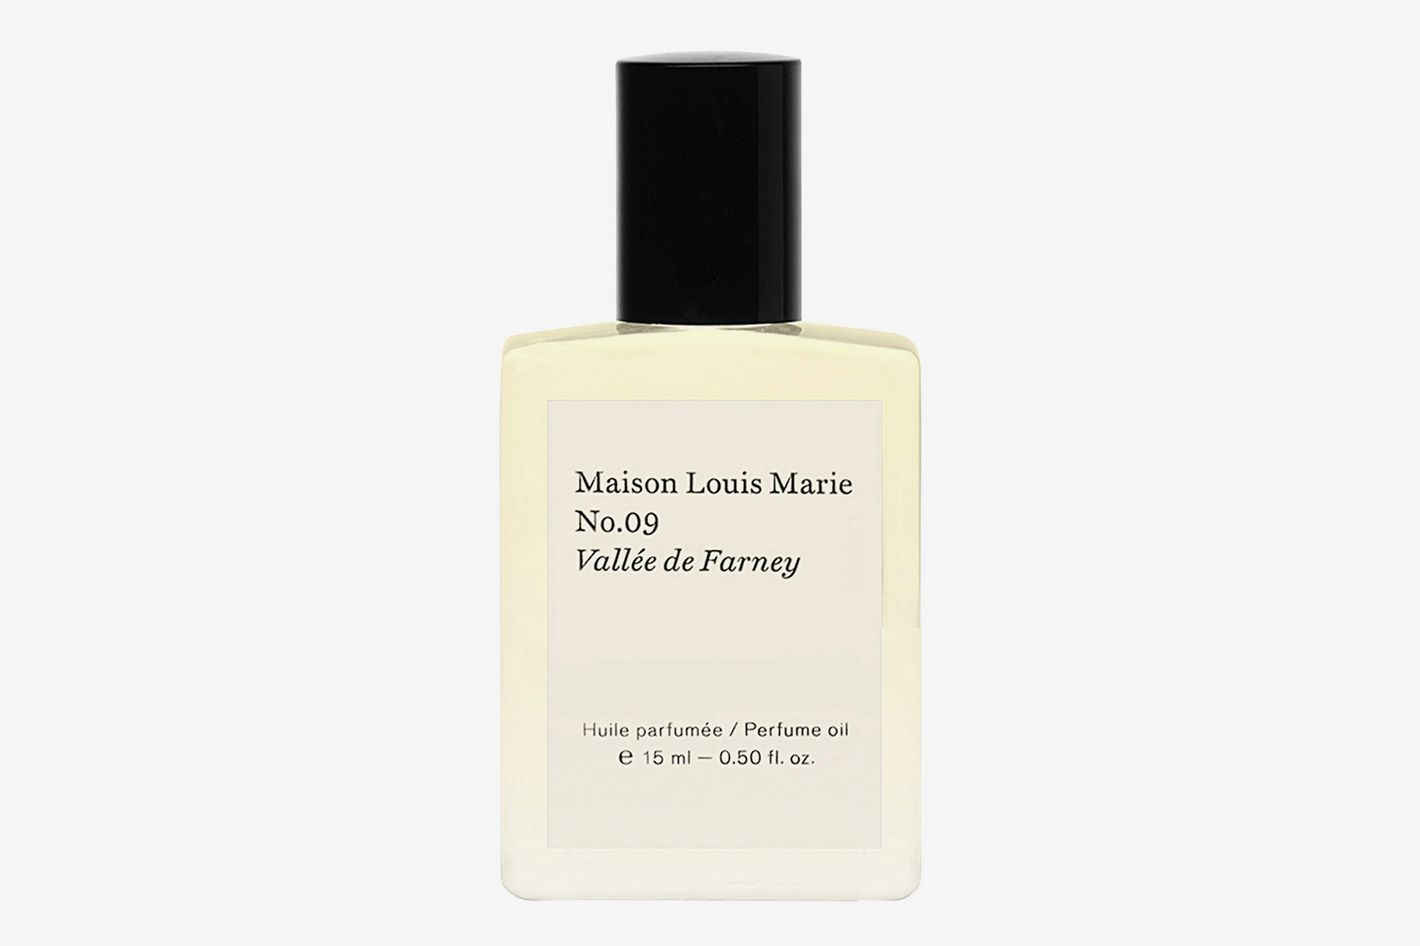 The Best Affordable Fancy Candle Is Maison Louis Marie